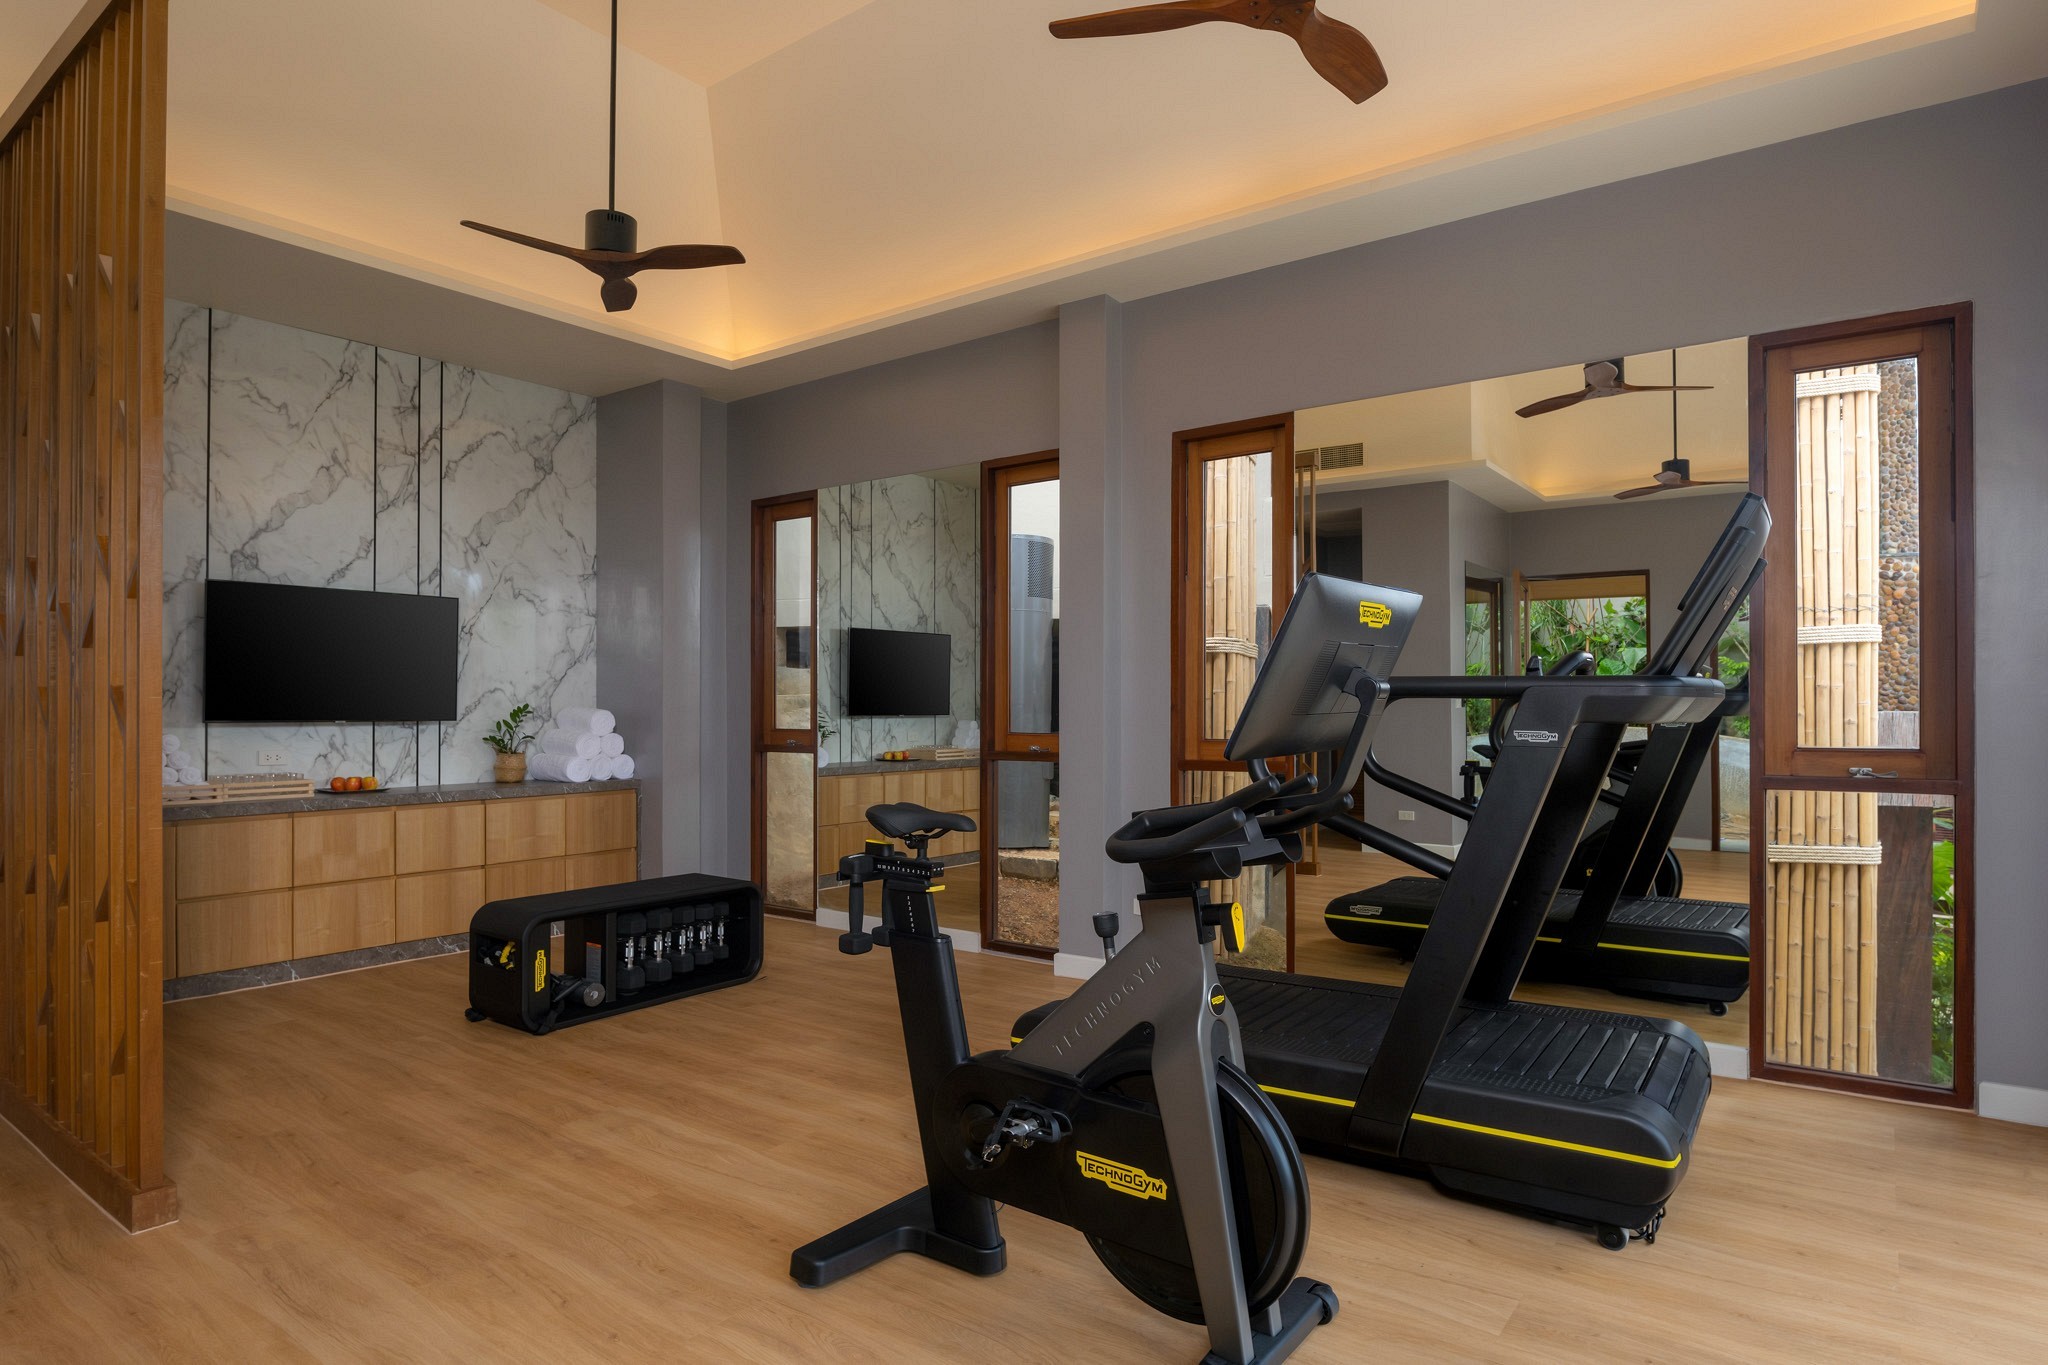 5 star luxury resort in phuket thailand with a gym and spa